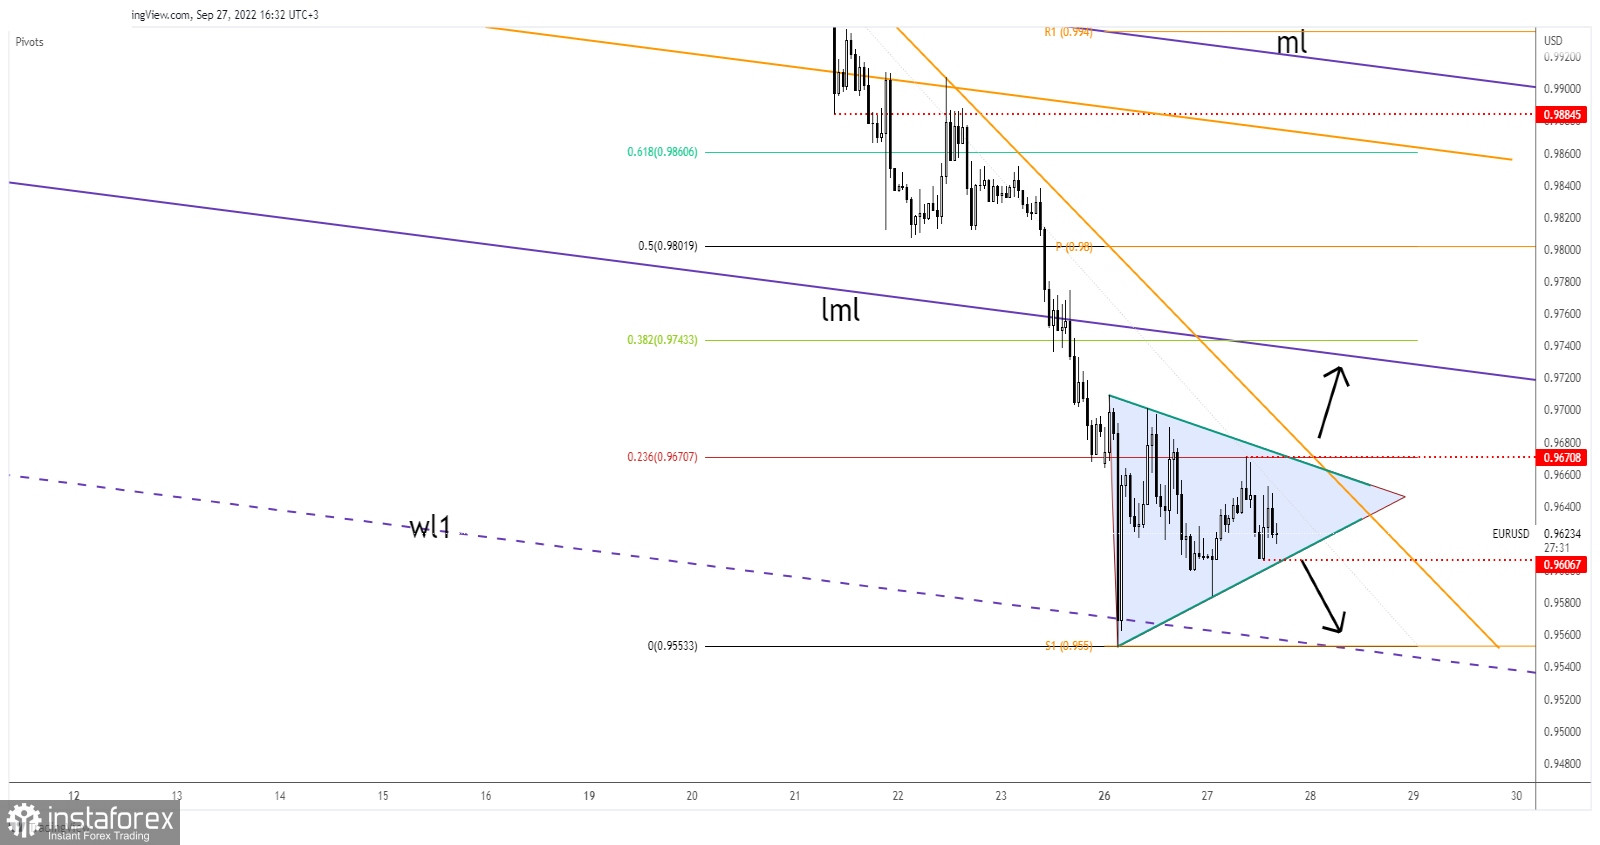 EUR/USD: symmetrical triangle to explode after CB consumer confidence report 